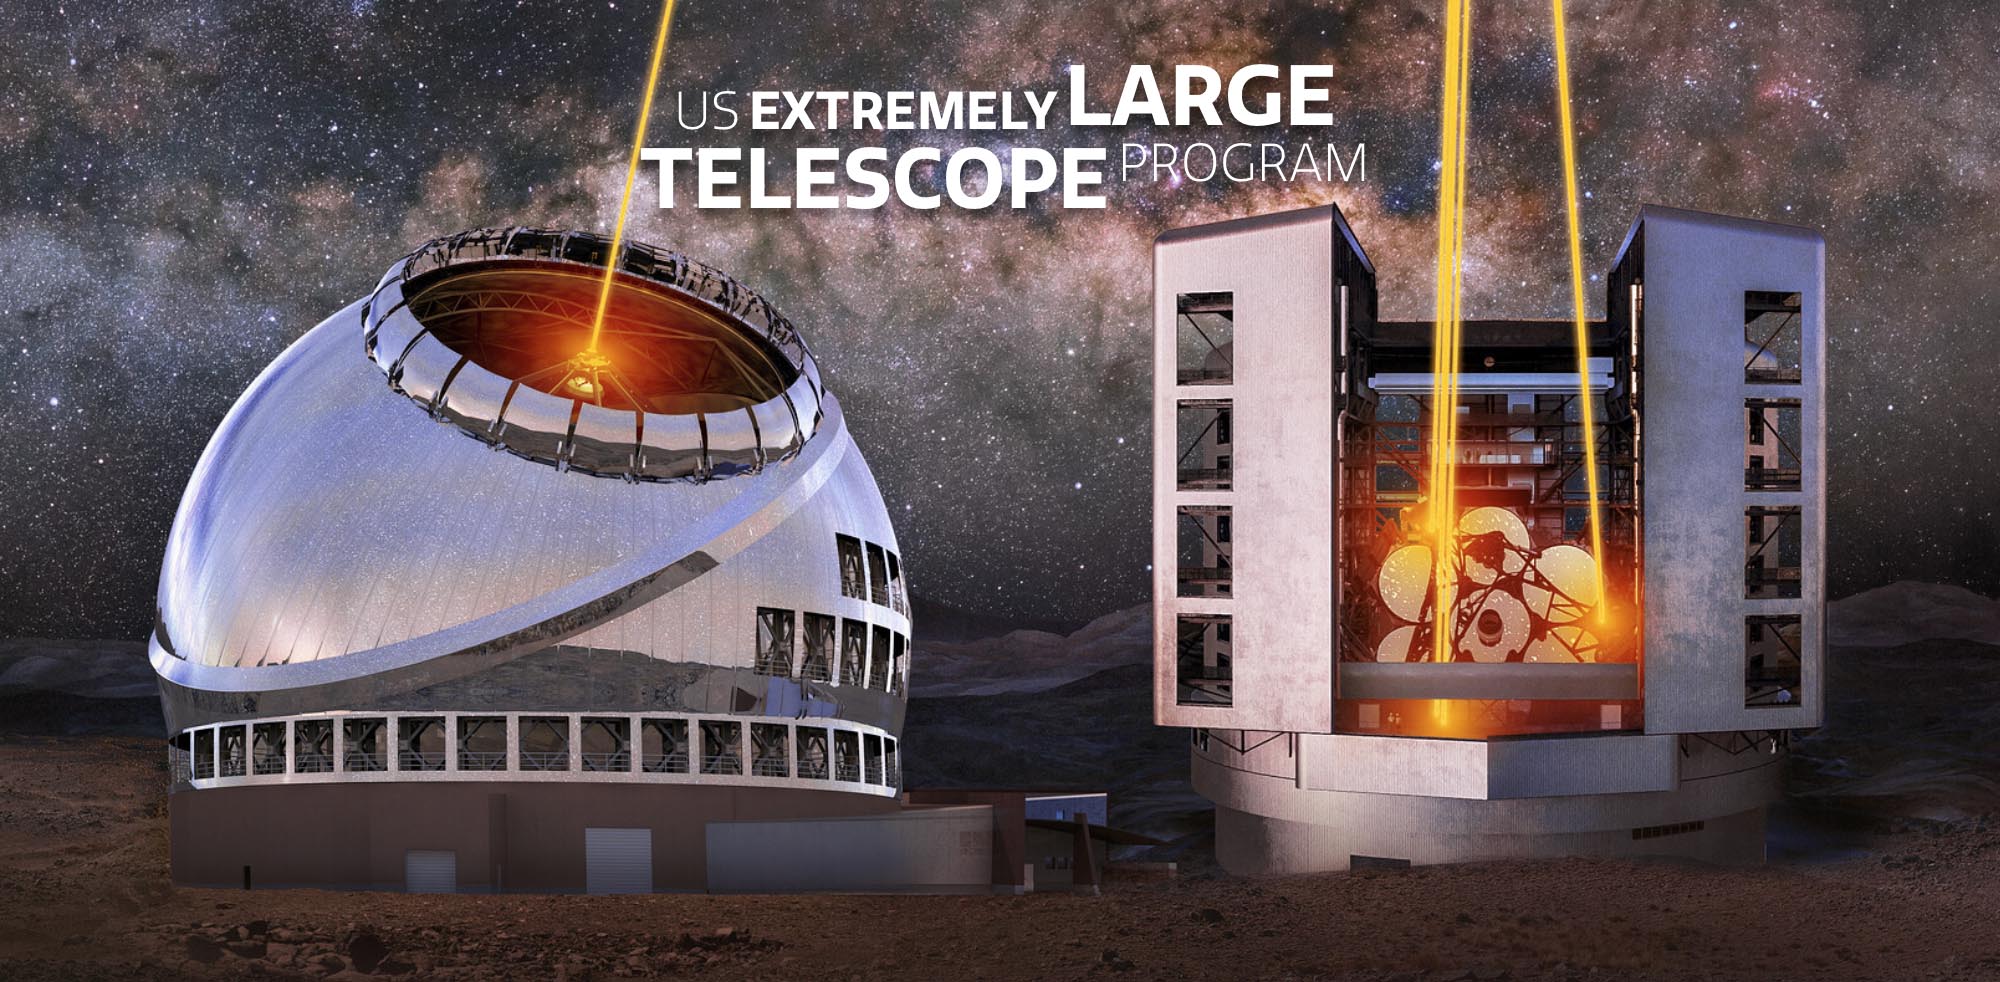 Illustration of the two extremely large telescopes now being planned.